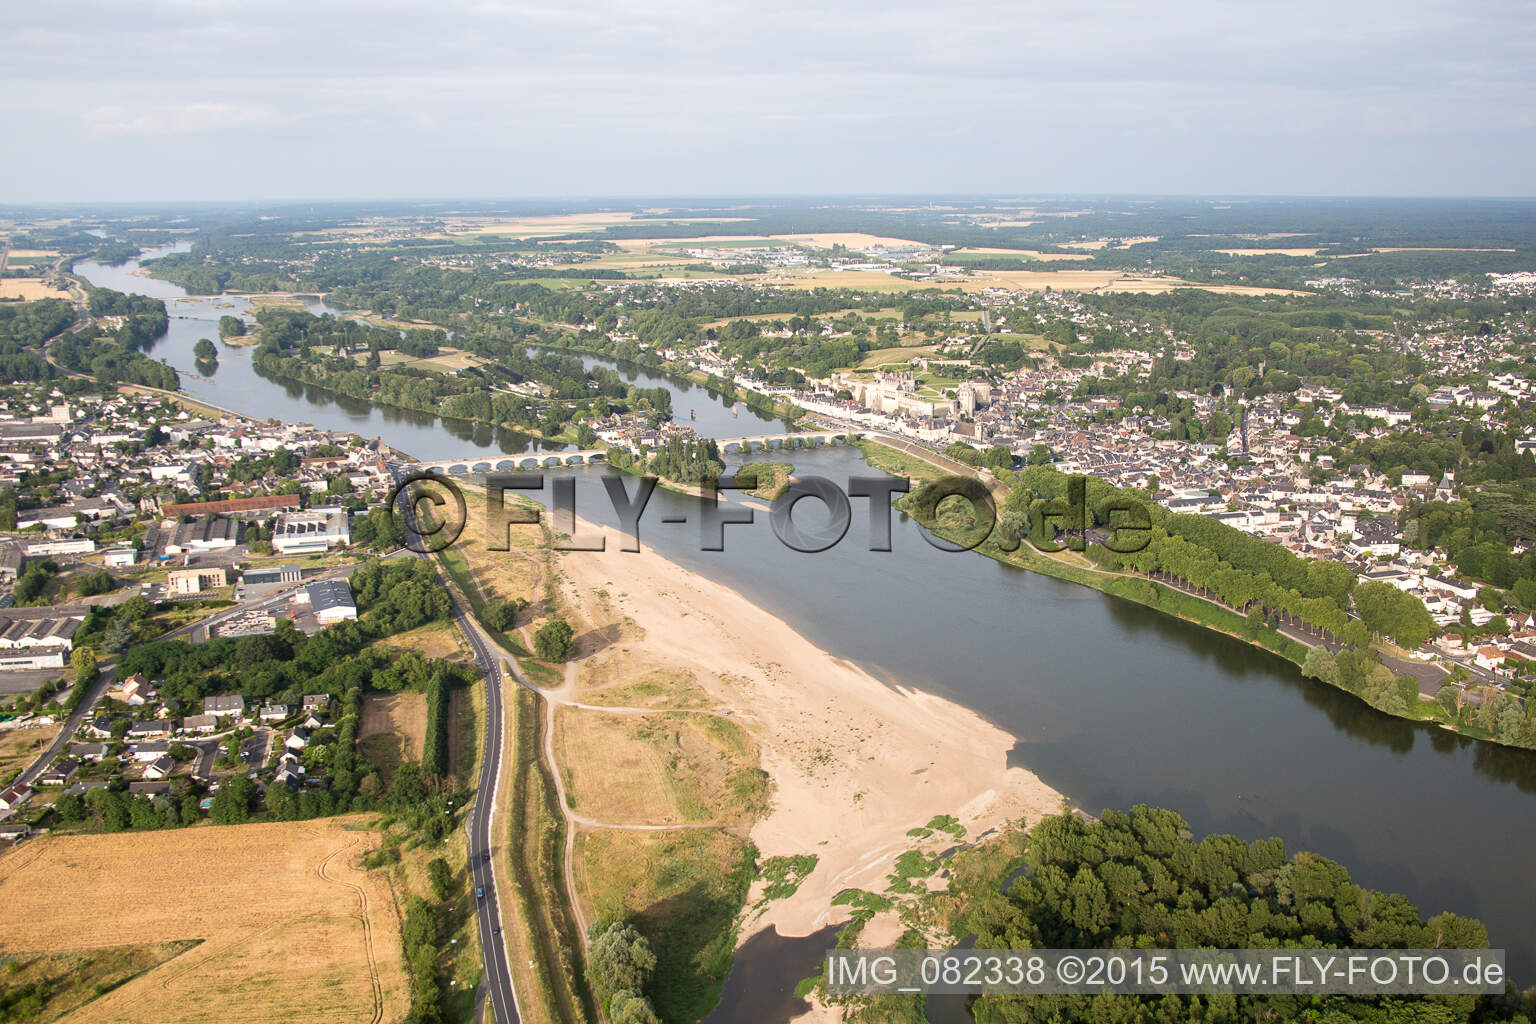 Bird's eye view of Amboise in the state Indre et Loire, France